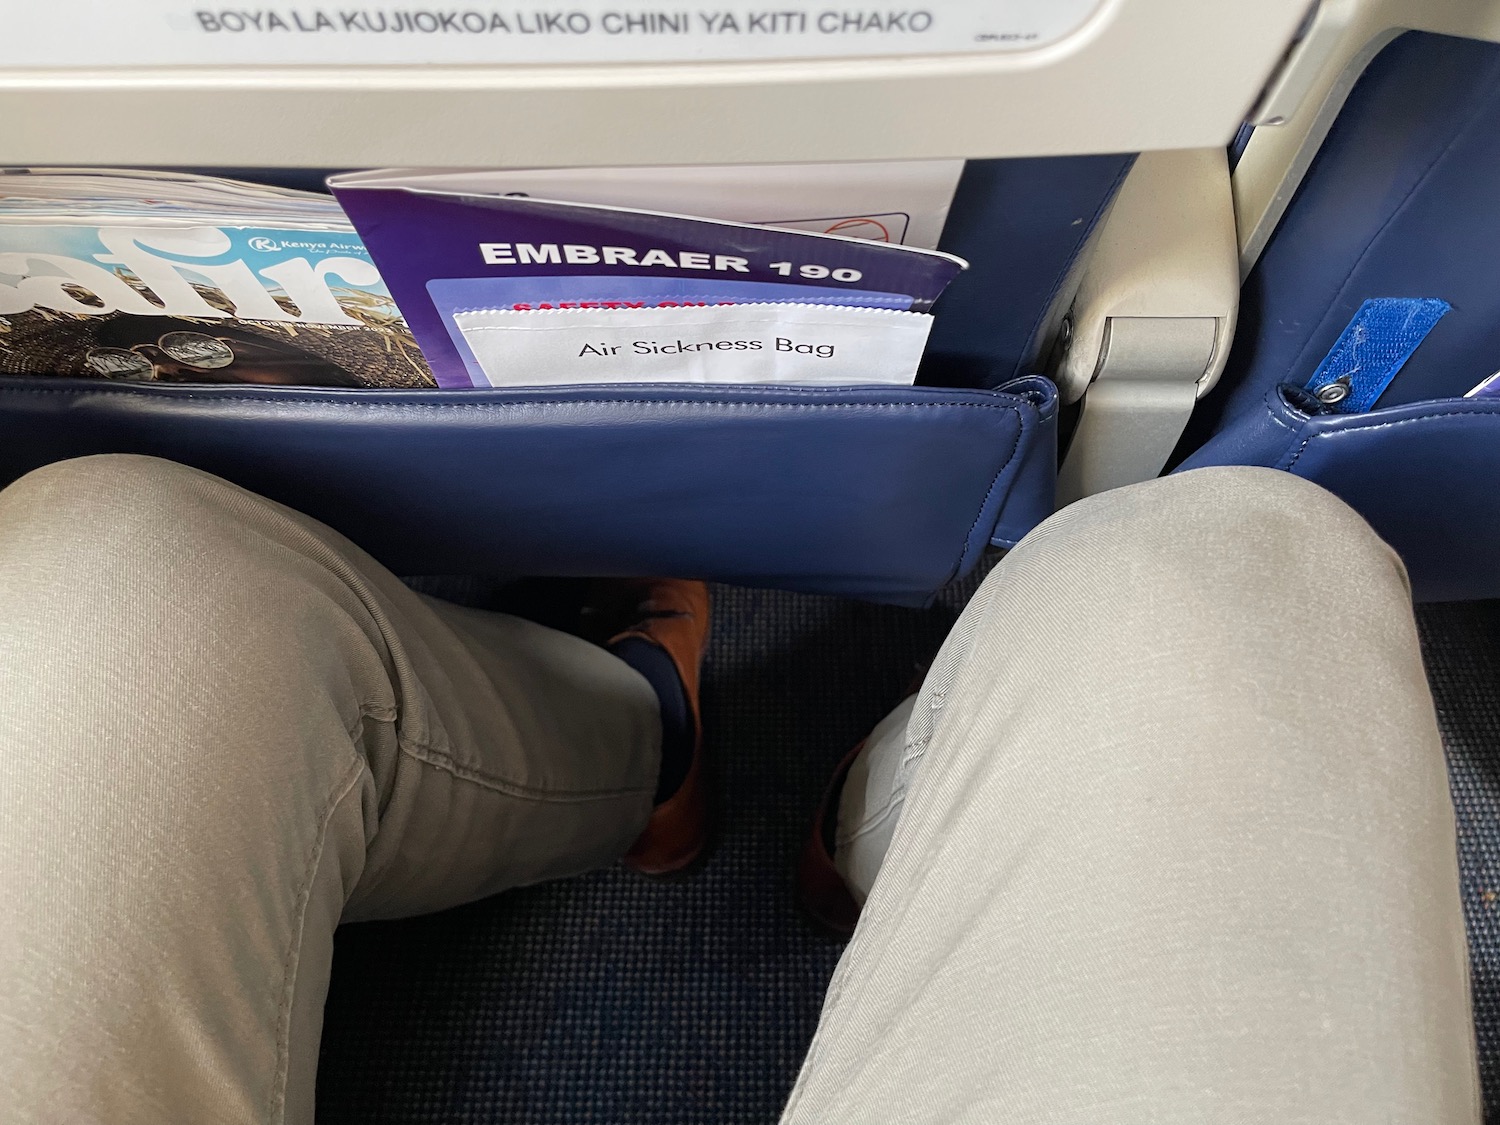 a person's legs and a magazine in the seat of an airplane